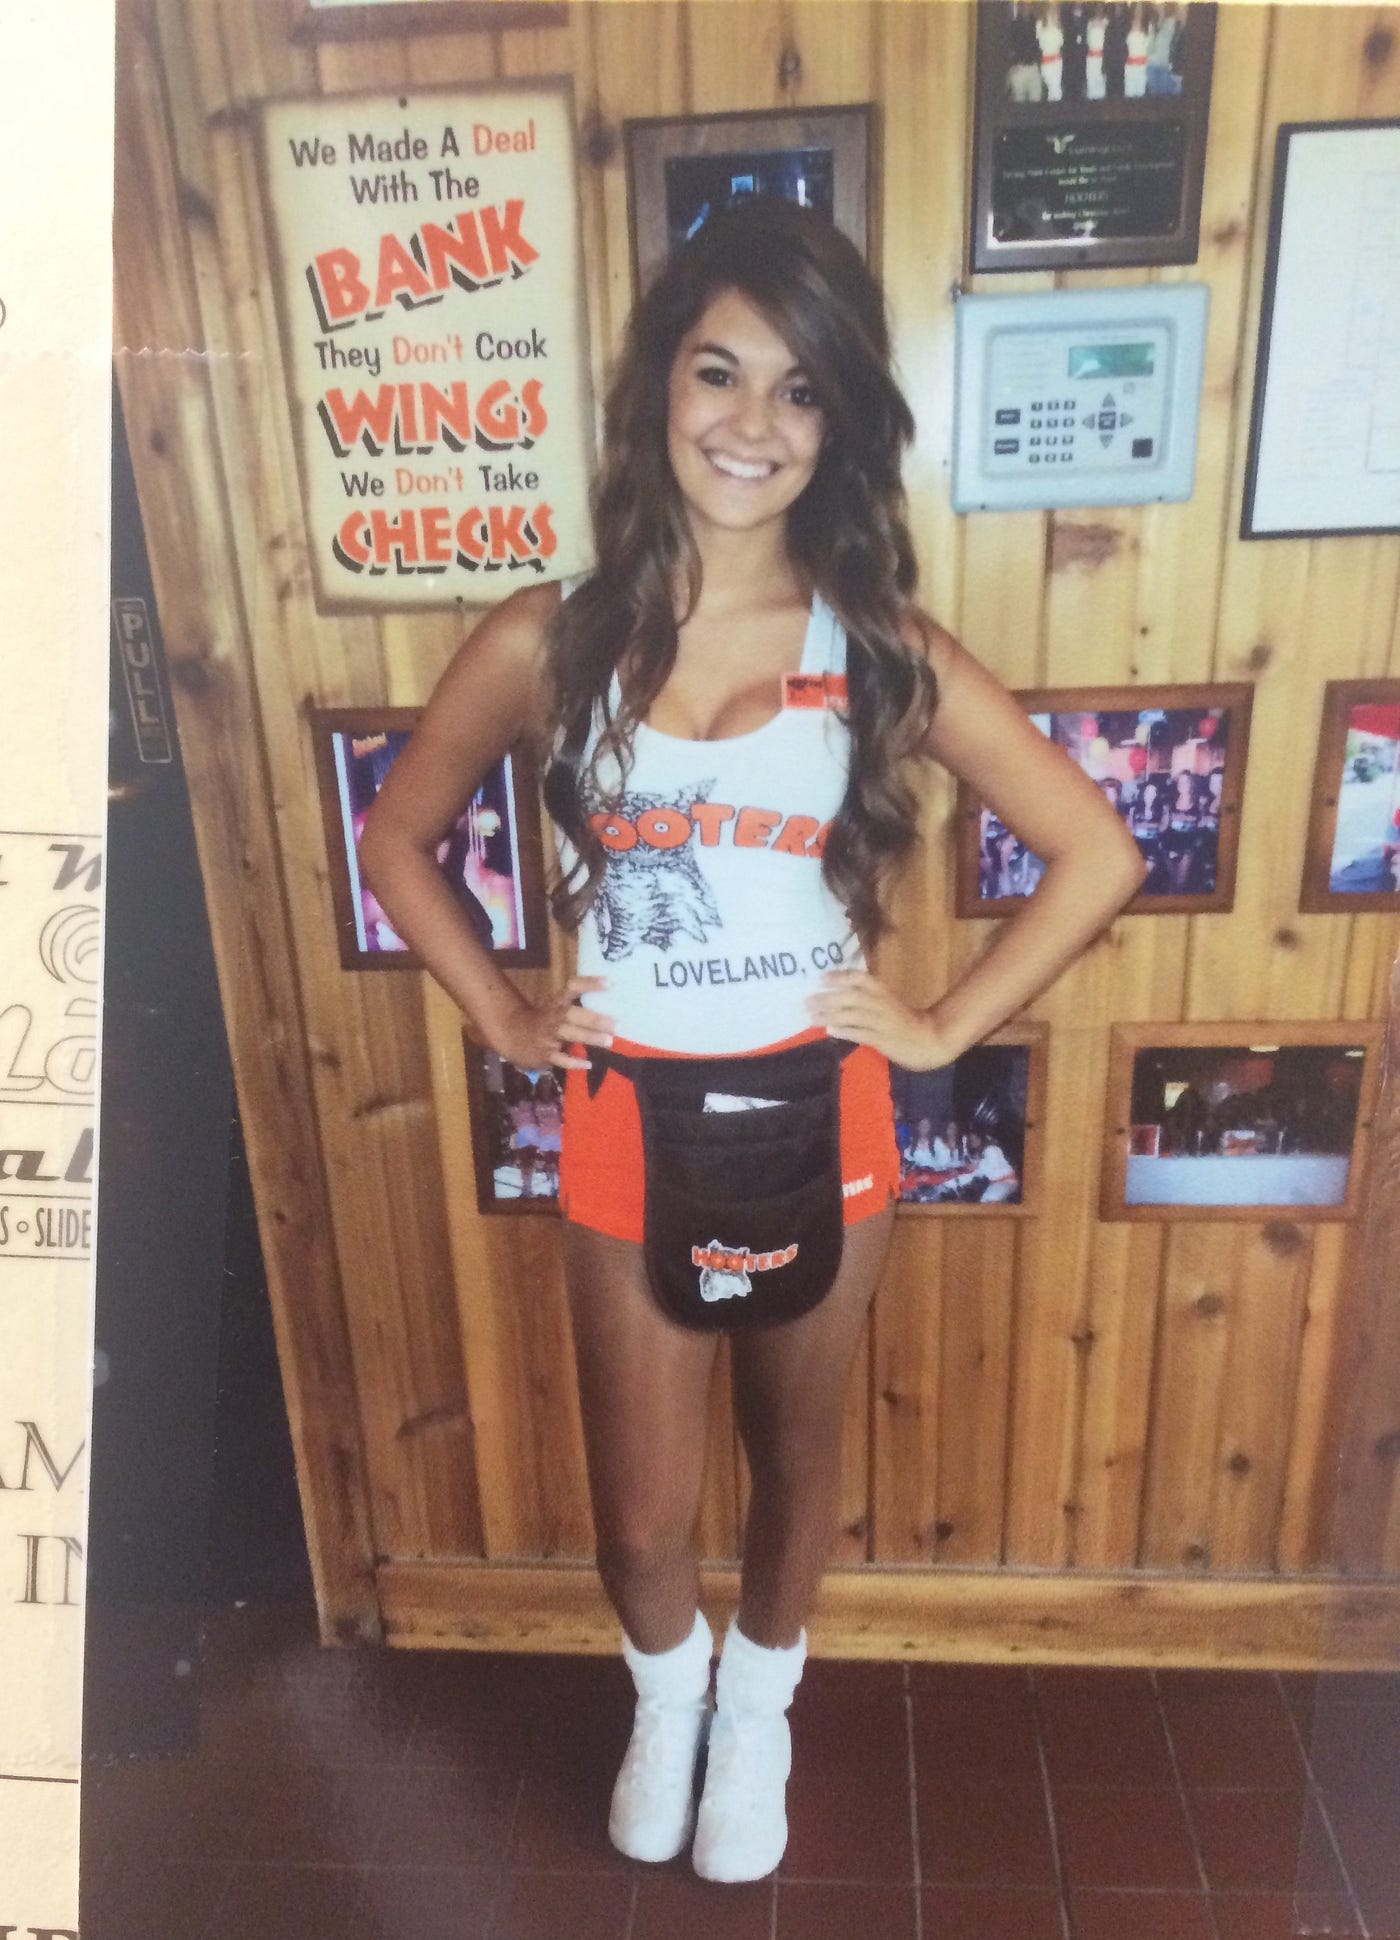 Authentic Hooters shorts worn by a Hooters Girl!